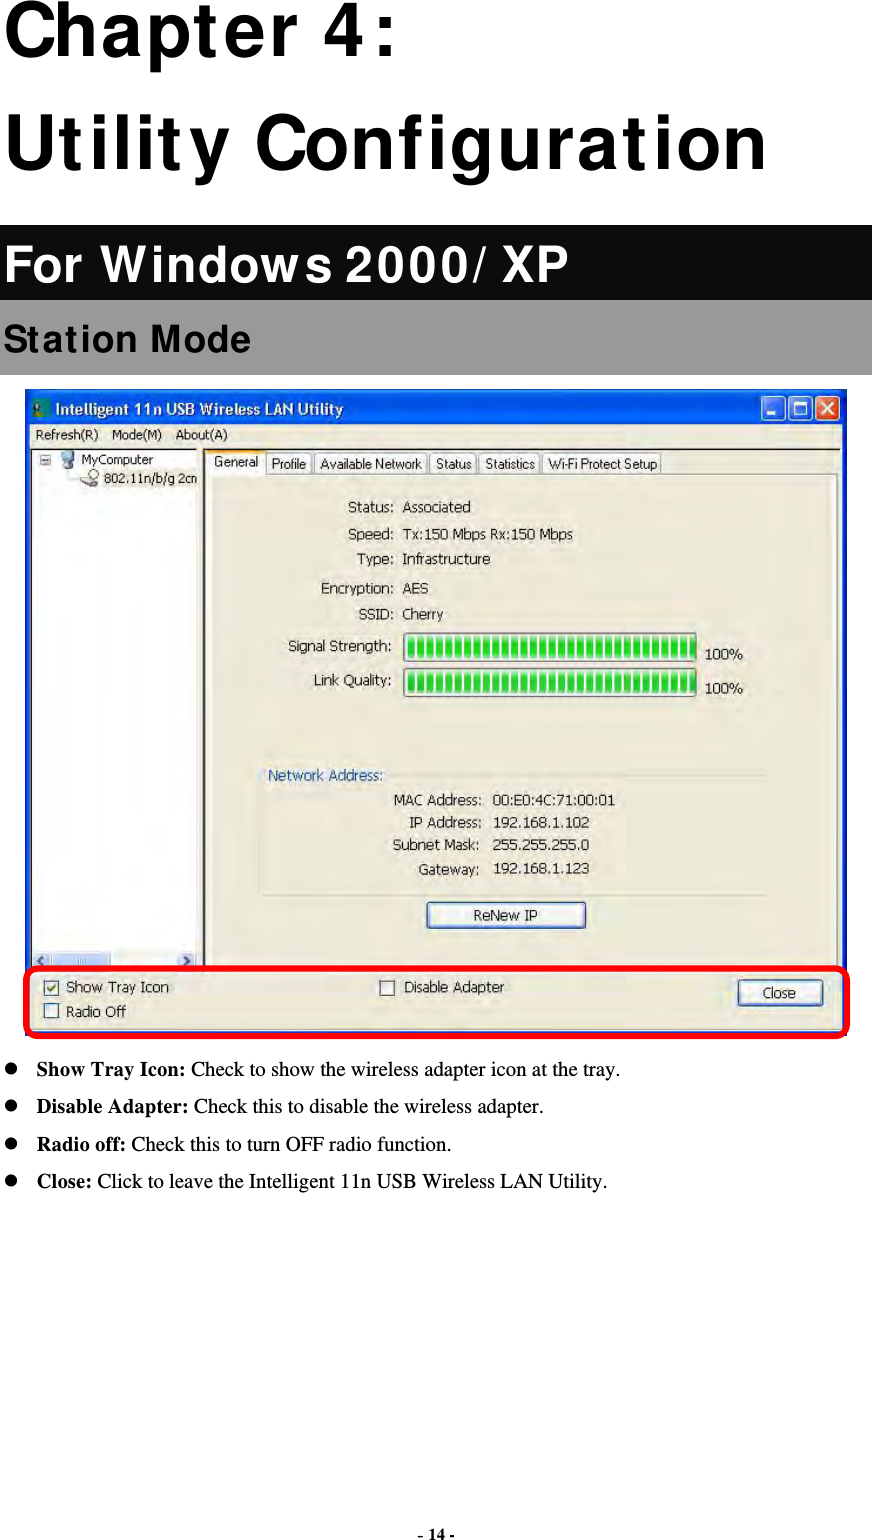  - 14 - Chapter 4: Utility Configuration For Windows 2000/ XP Station Mode  Show Tray Icon: Check to show the wireless adapter icon at the tray. Disable Adapter: Check this to disable the wireless adapter. Radio off: Check this to turn OFF radio function. Close: Click to leave the Intelligent 11n USB Wireless LAN Utility.       